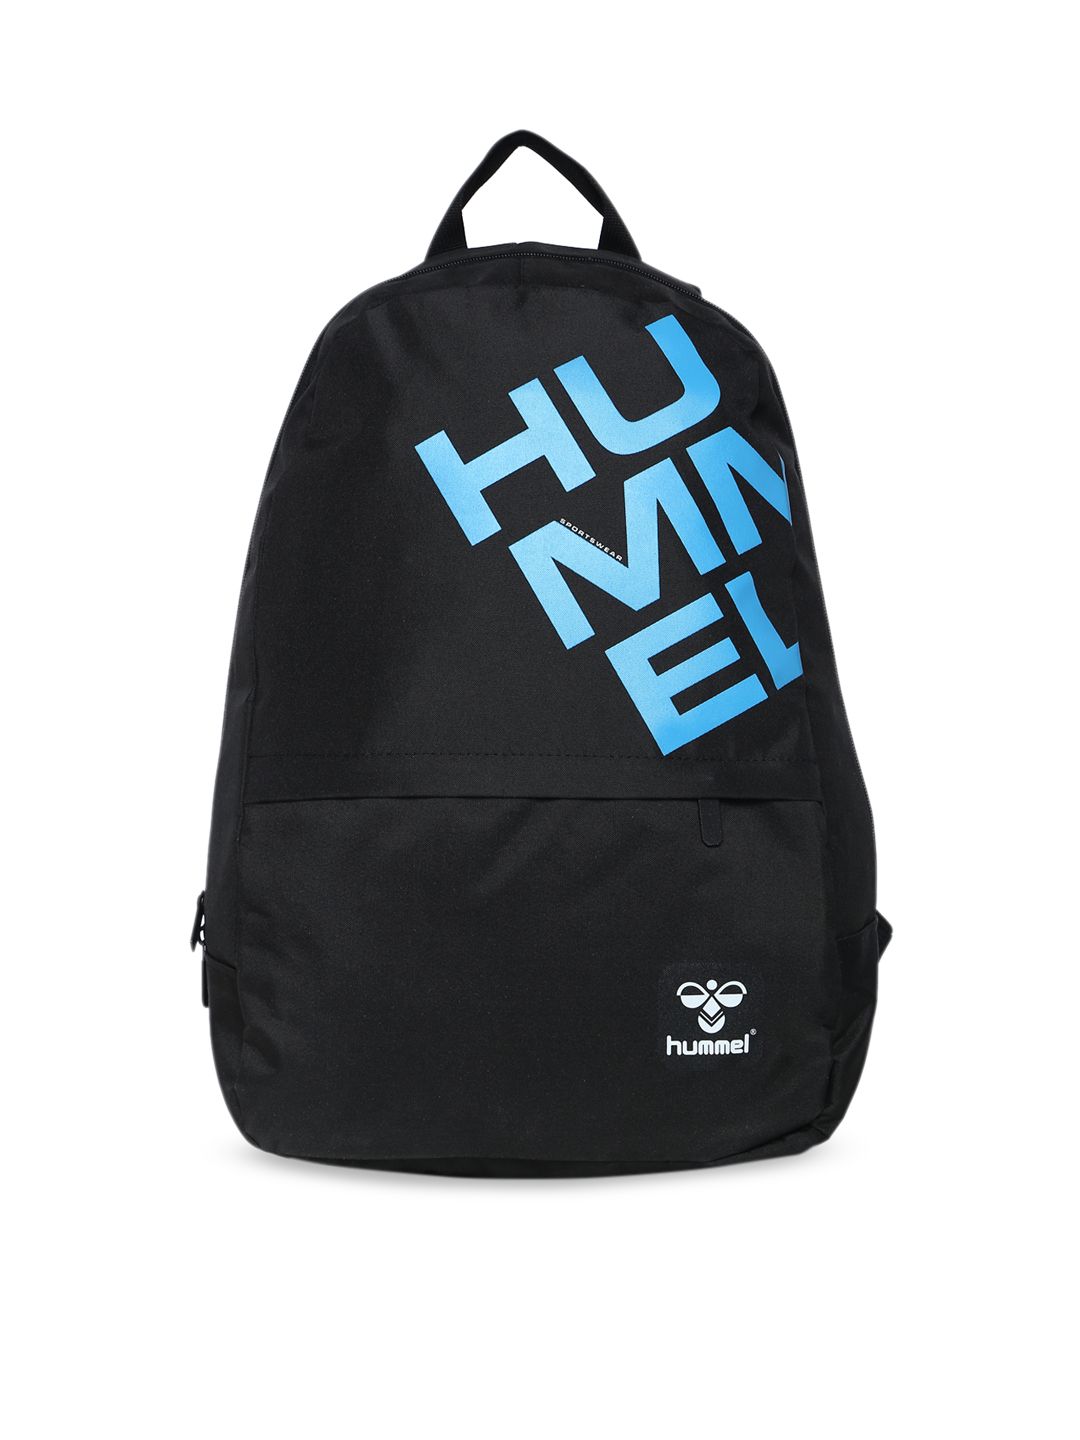 hummel Unisex Black & Blue Typography Backpack Price in India